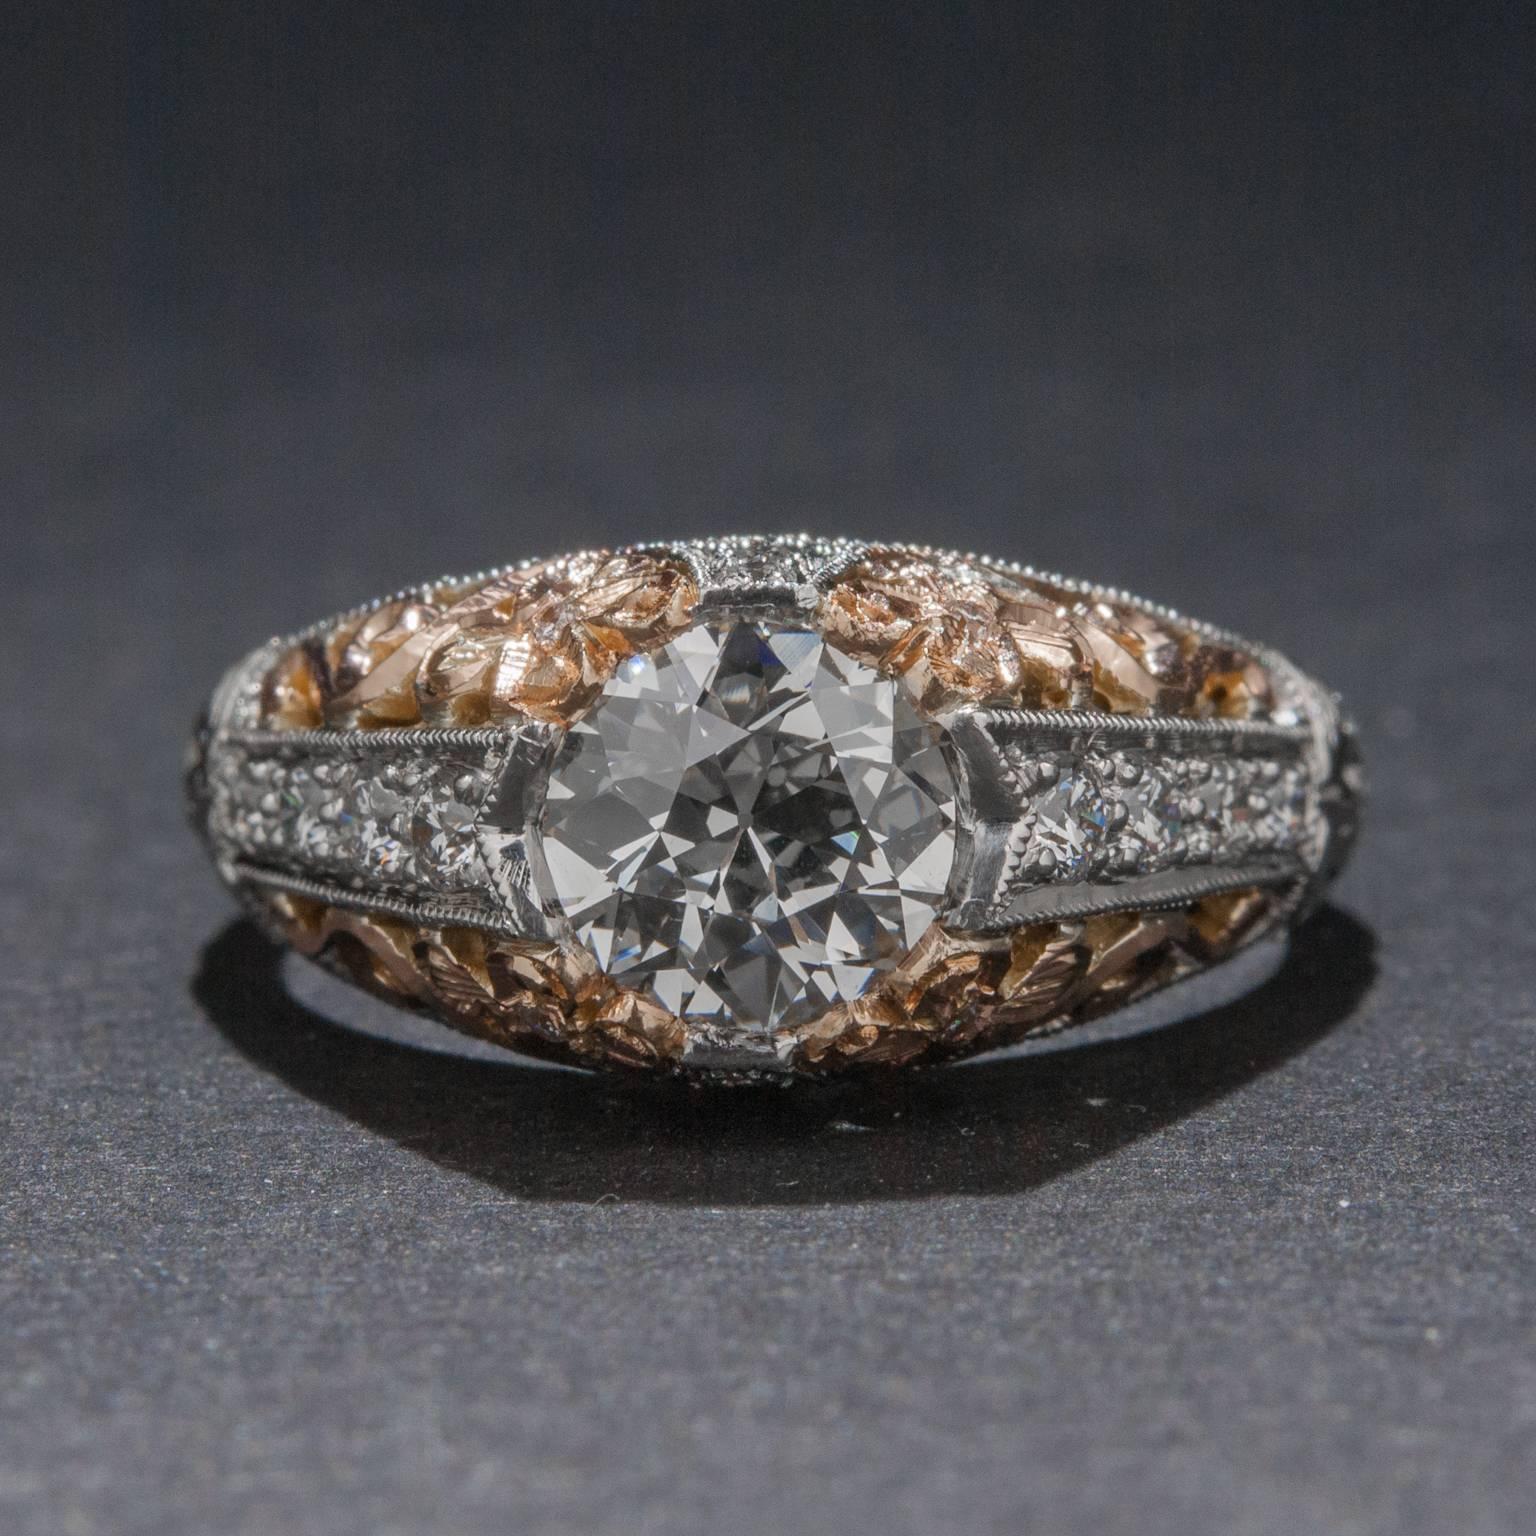 This stunning vintage style ring features a brilliant 1.01 carat center diamond (G color, VS1 clarity) as well as 12 side diamonds for .12 total carats. The platinum and rose gold mounting has intricate filigree work and milgrain detailing. This